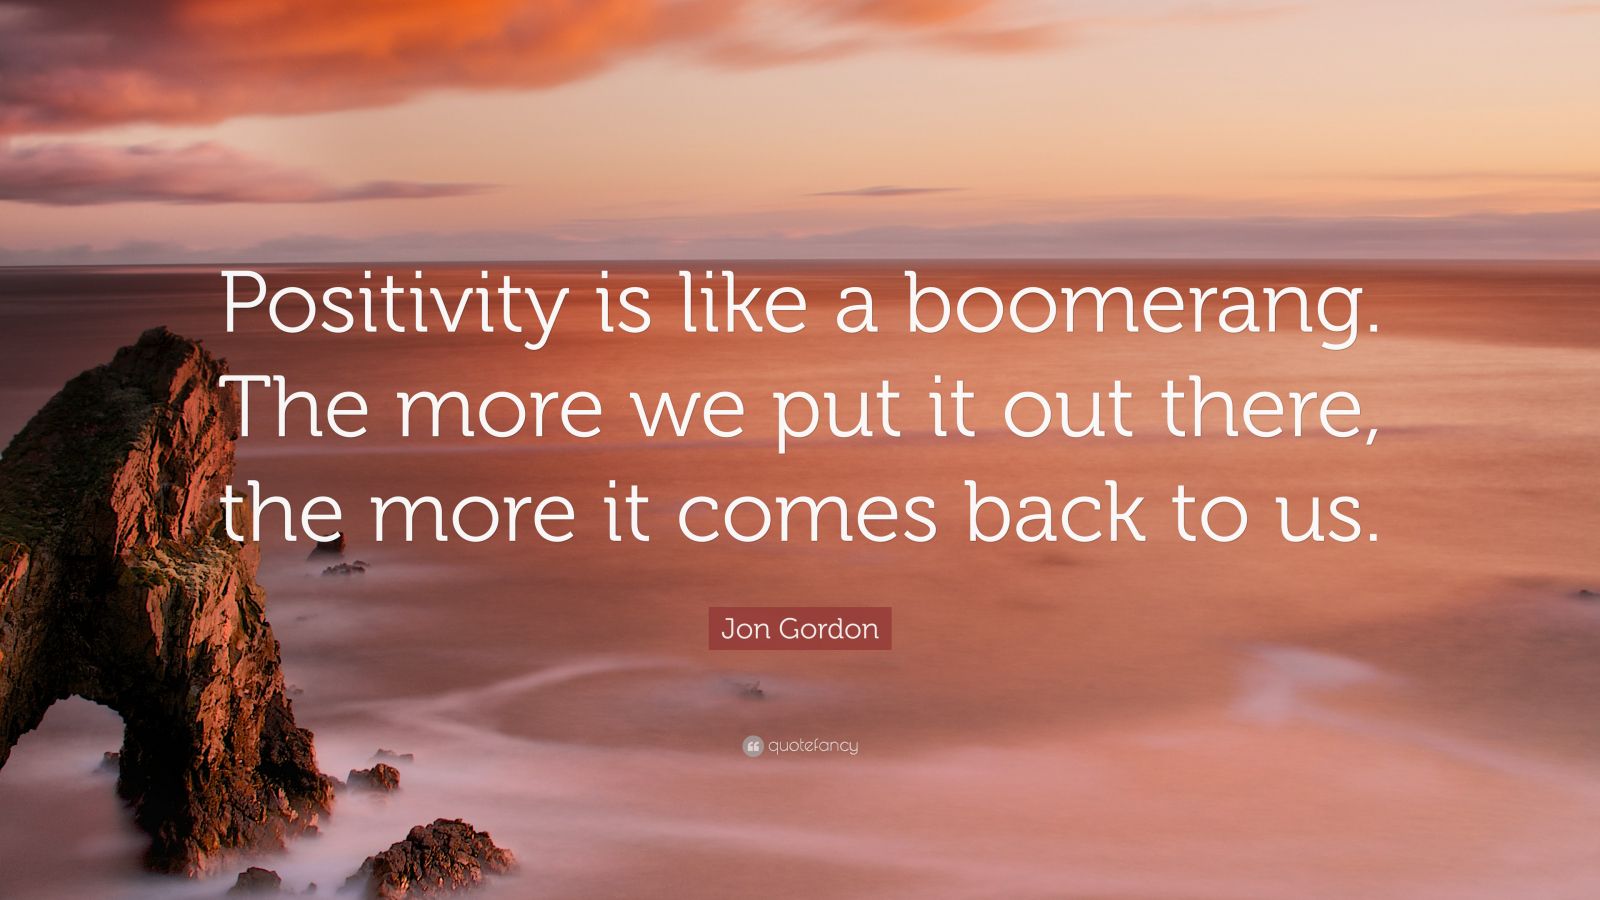 Positivity is like a boomerang. The more we put it out